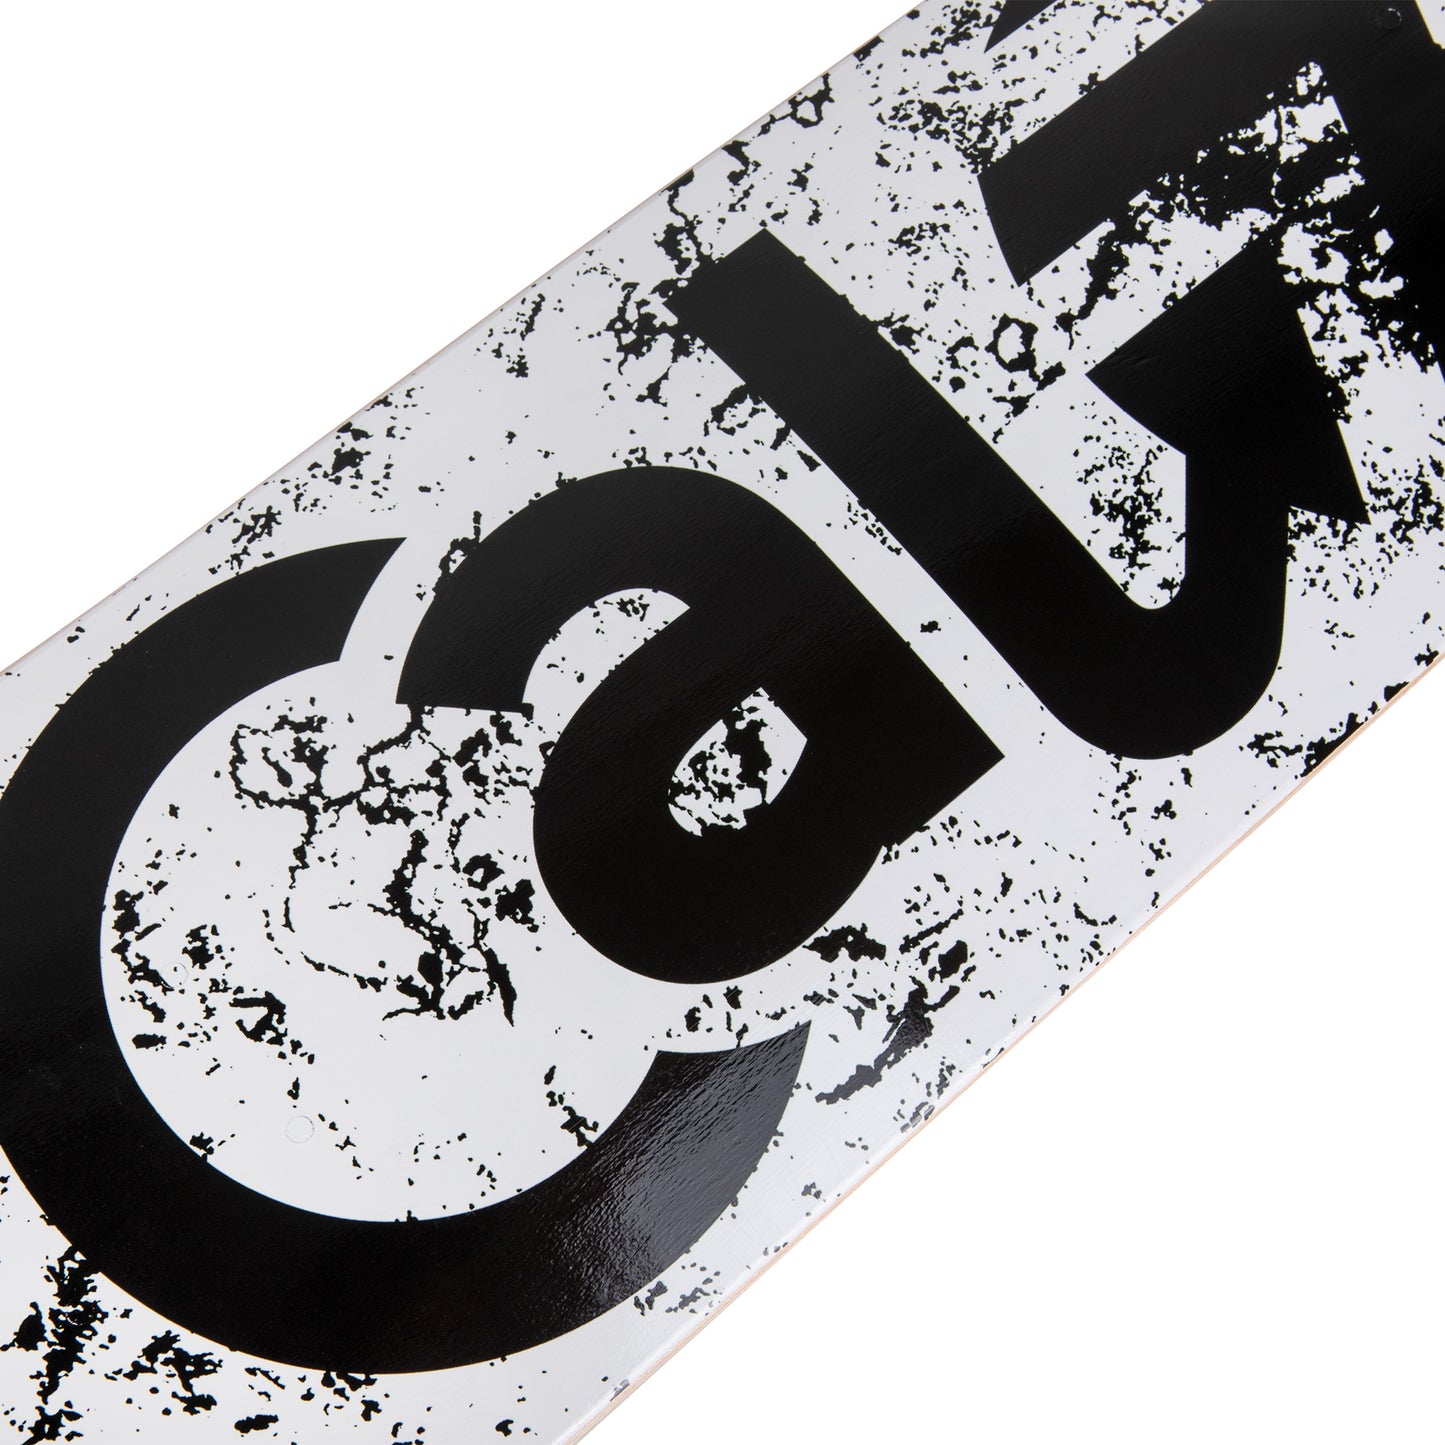 Cal 7 Abstract 8”/ 8.25”/8.5”-Inch Skateboard Deck Black and White Spray Paint Marble Effect and Logo Design